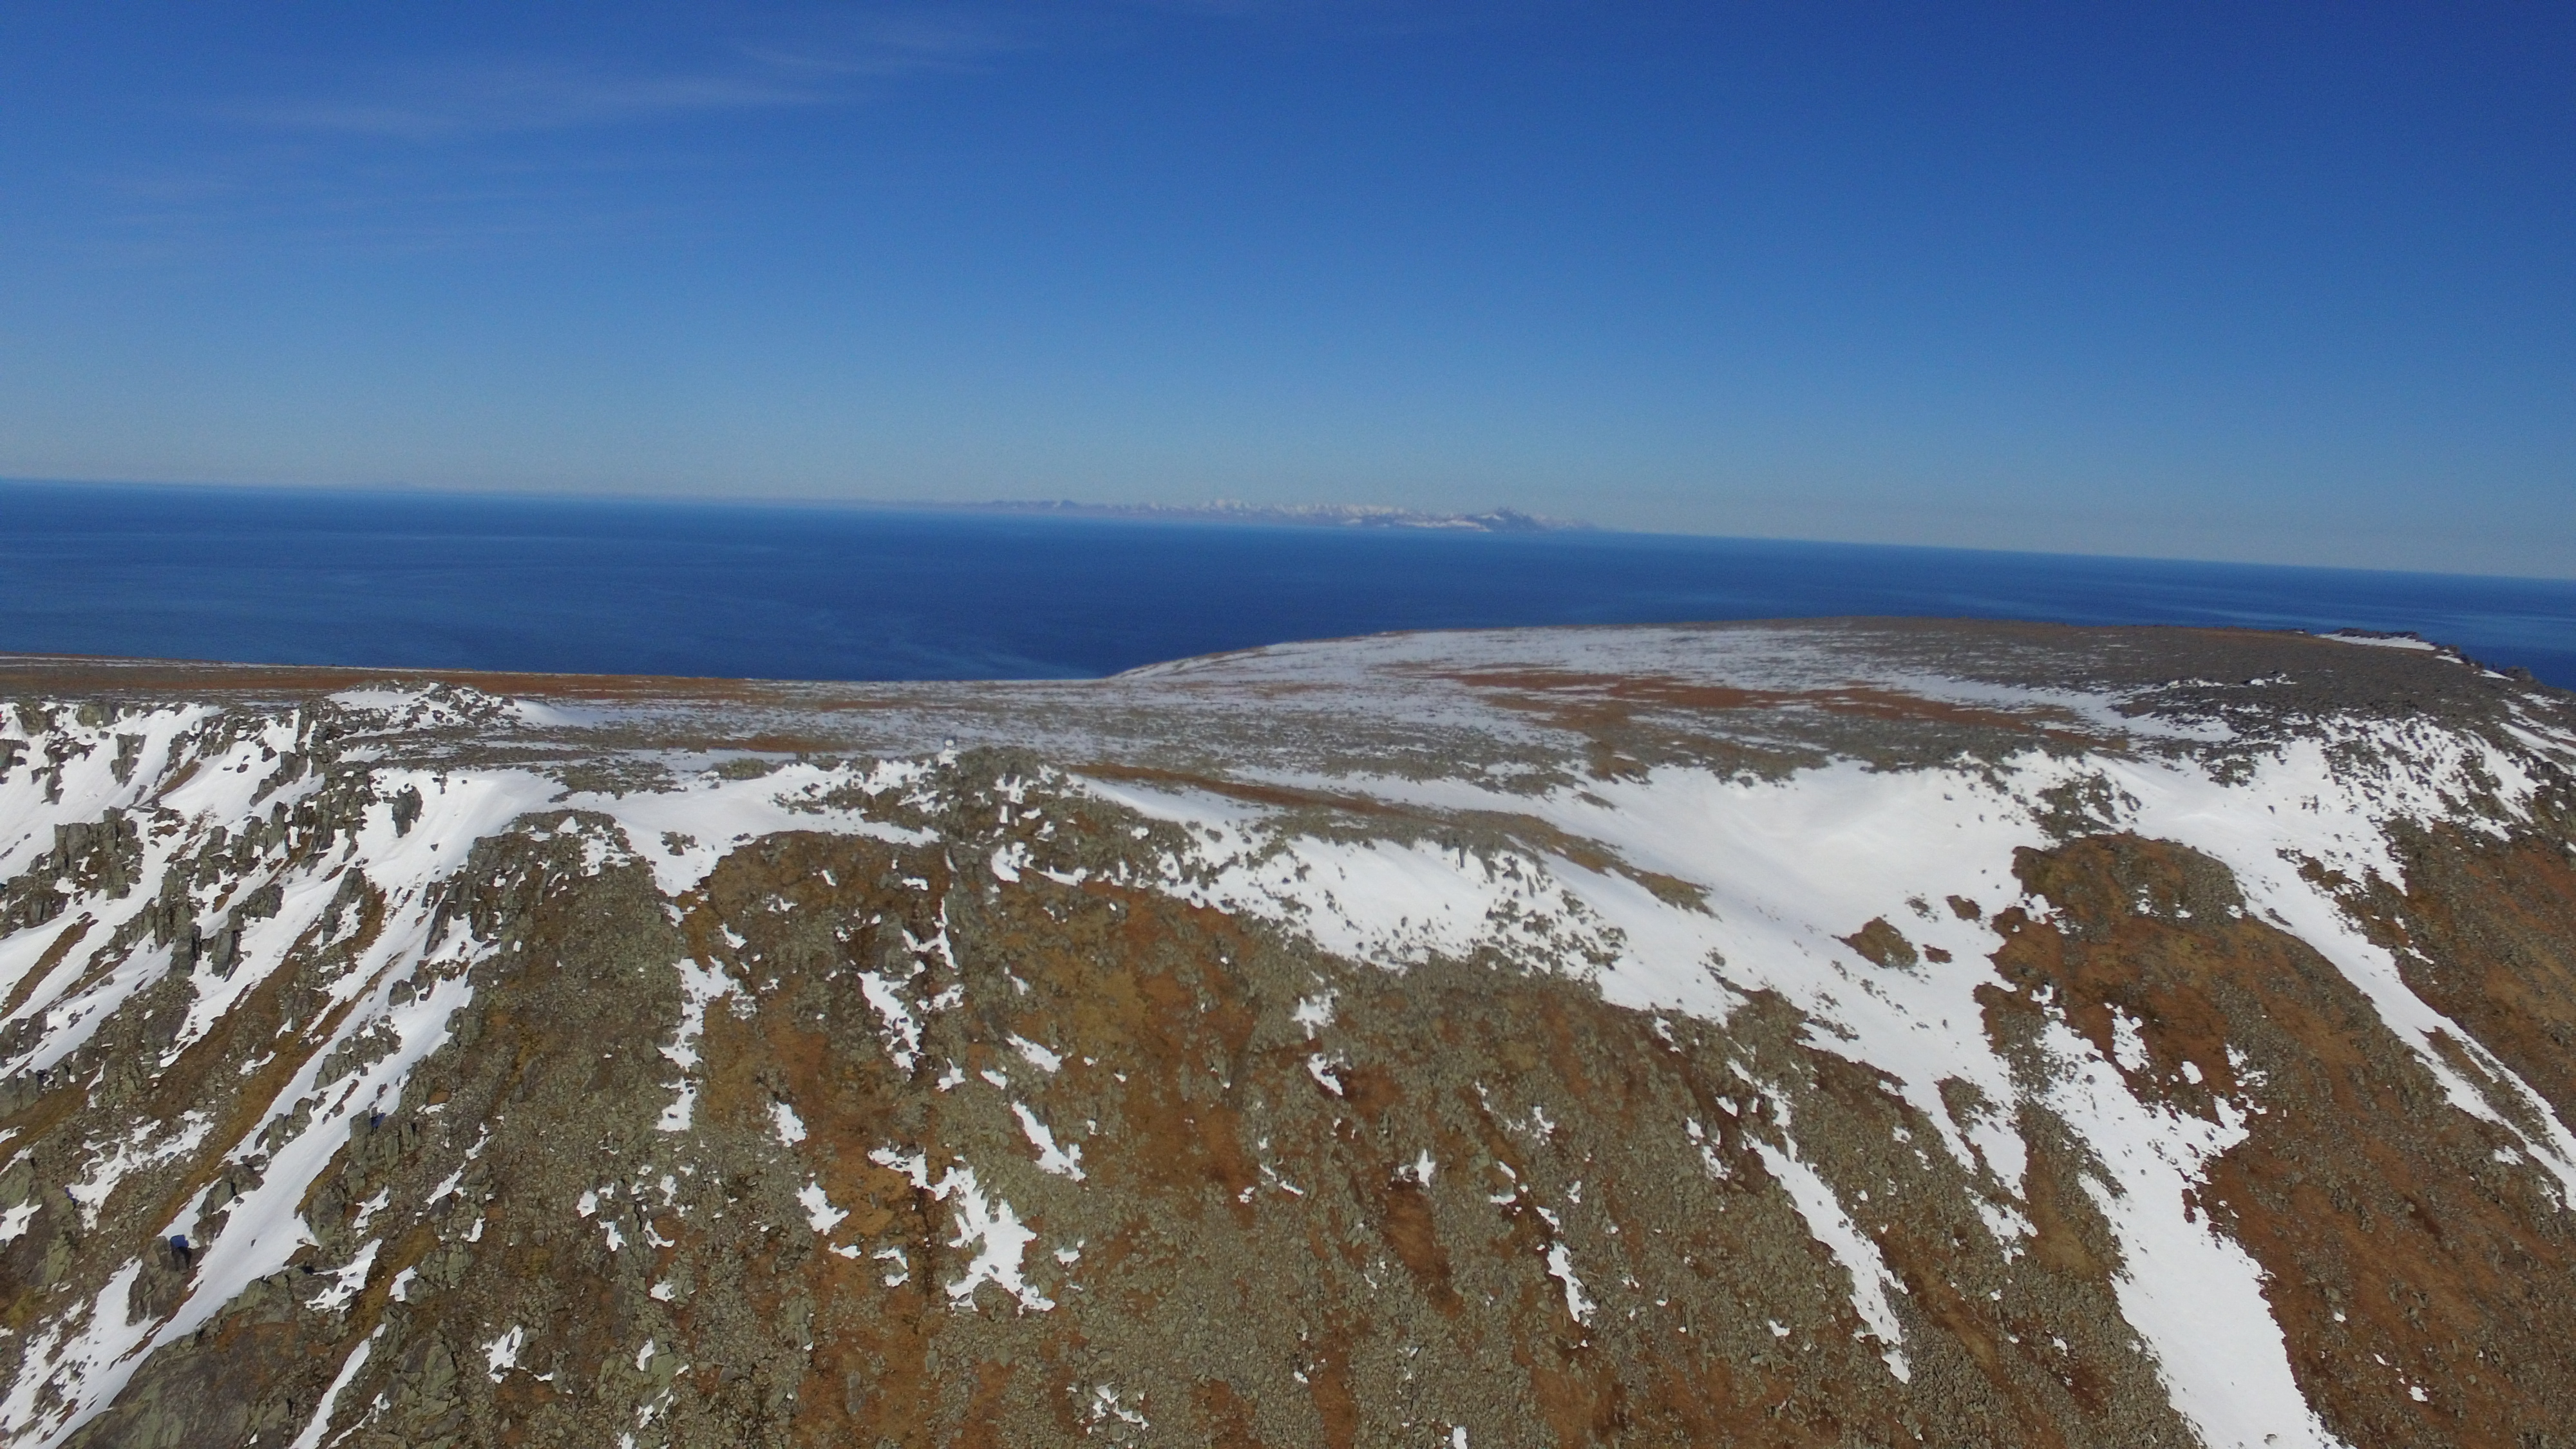 Diomede Island - over the top - US Mainland in the bacground